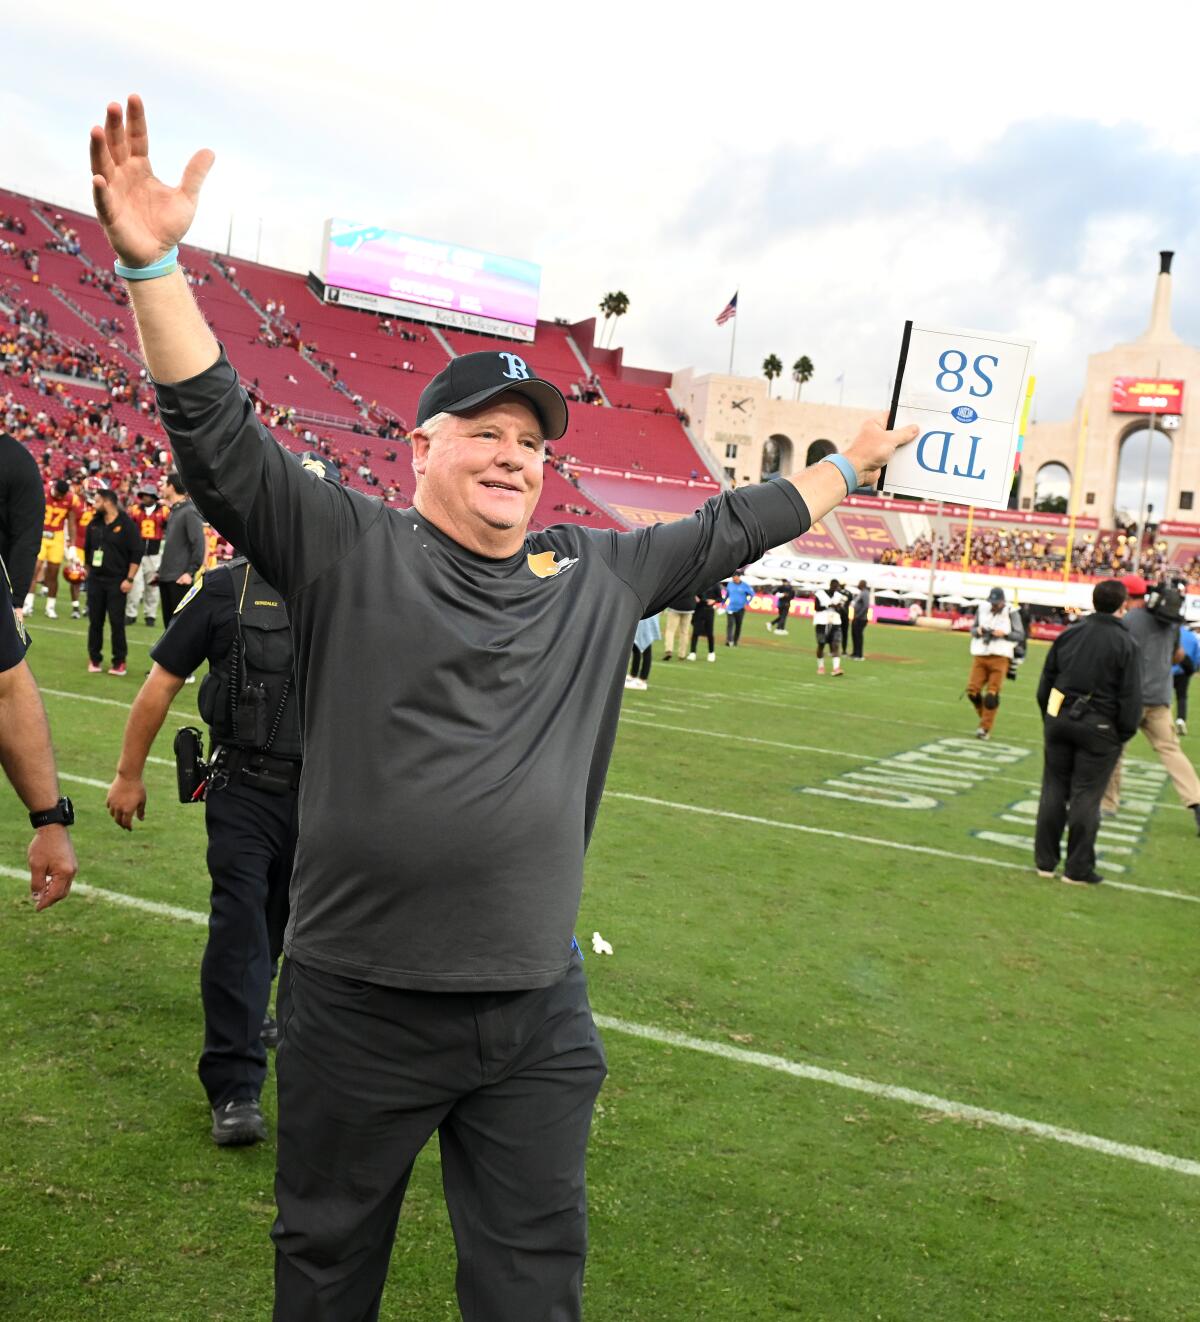 UCLA head coach Chip Kelly extends his arm while walking on the field at the Coliseum on Nov. 18.